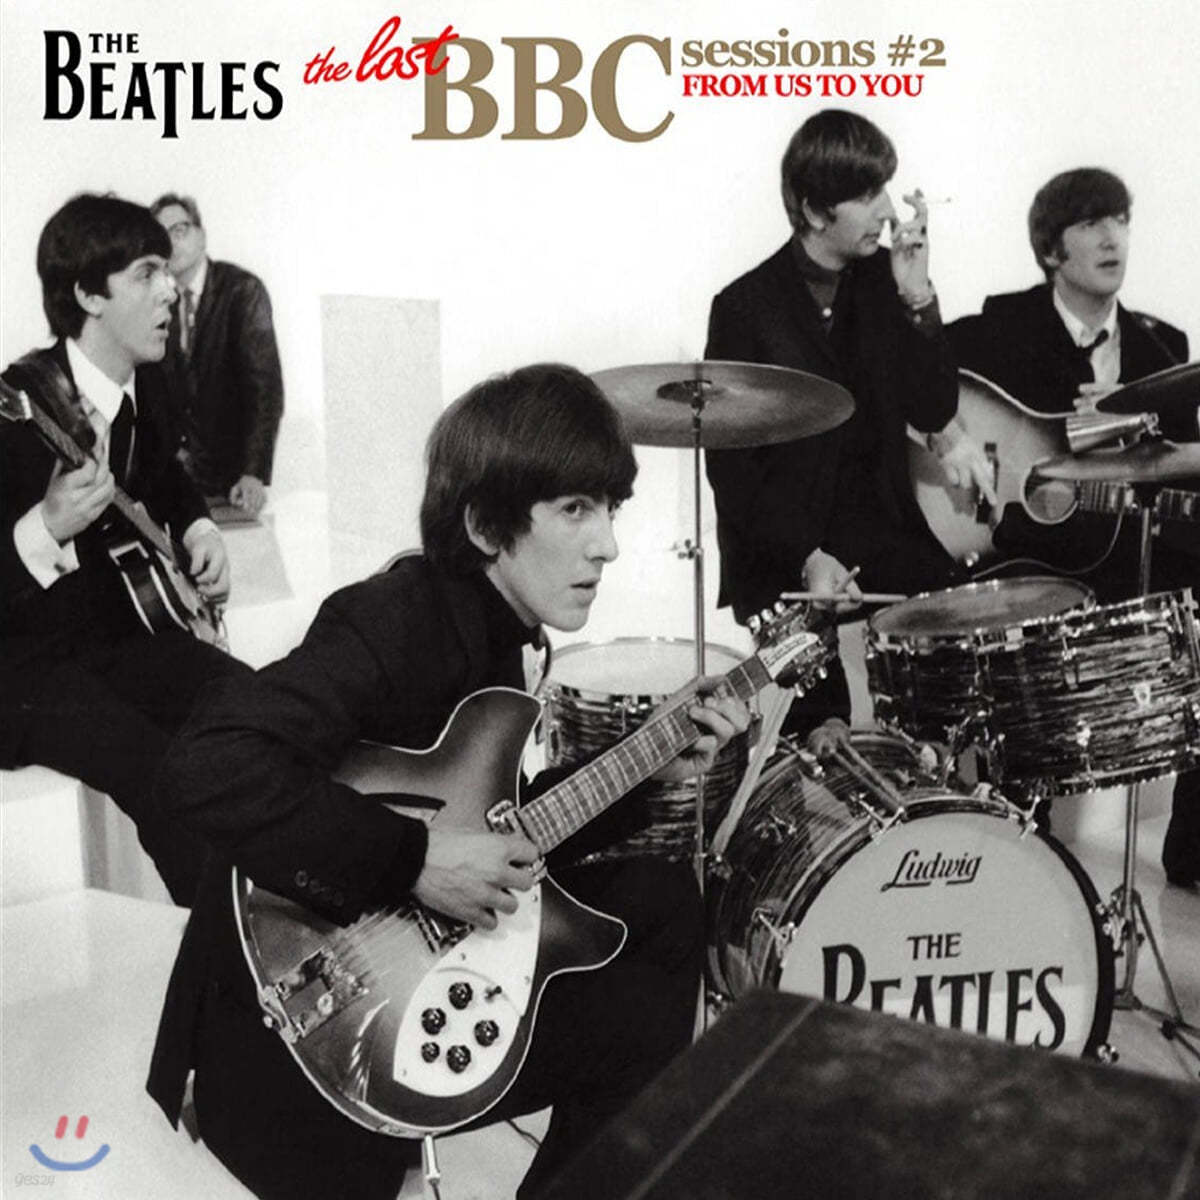 The Beatles (비틀즈) - The Lost BBC Sessions #2